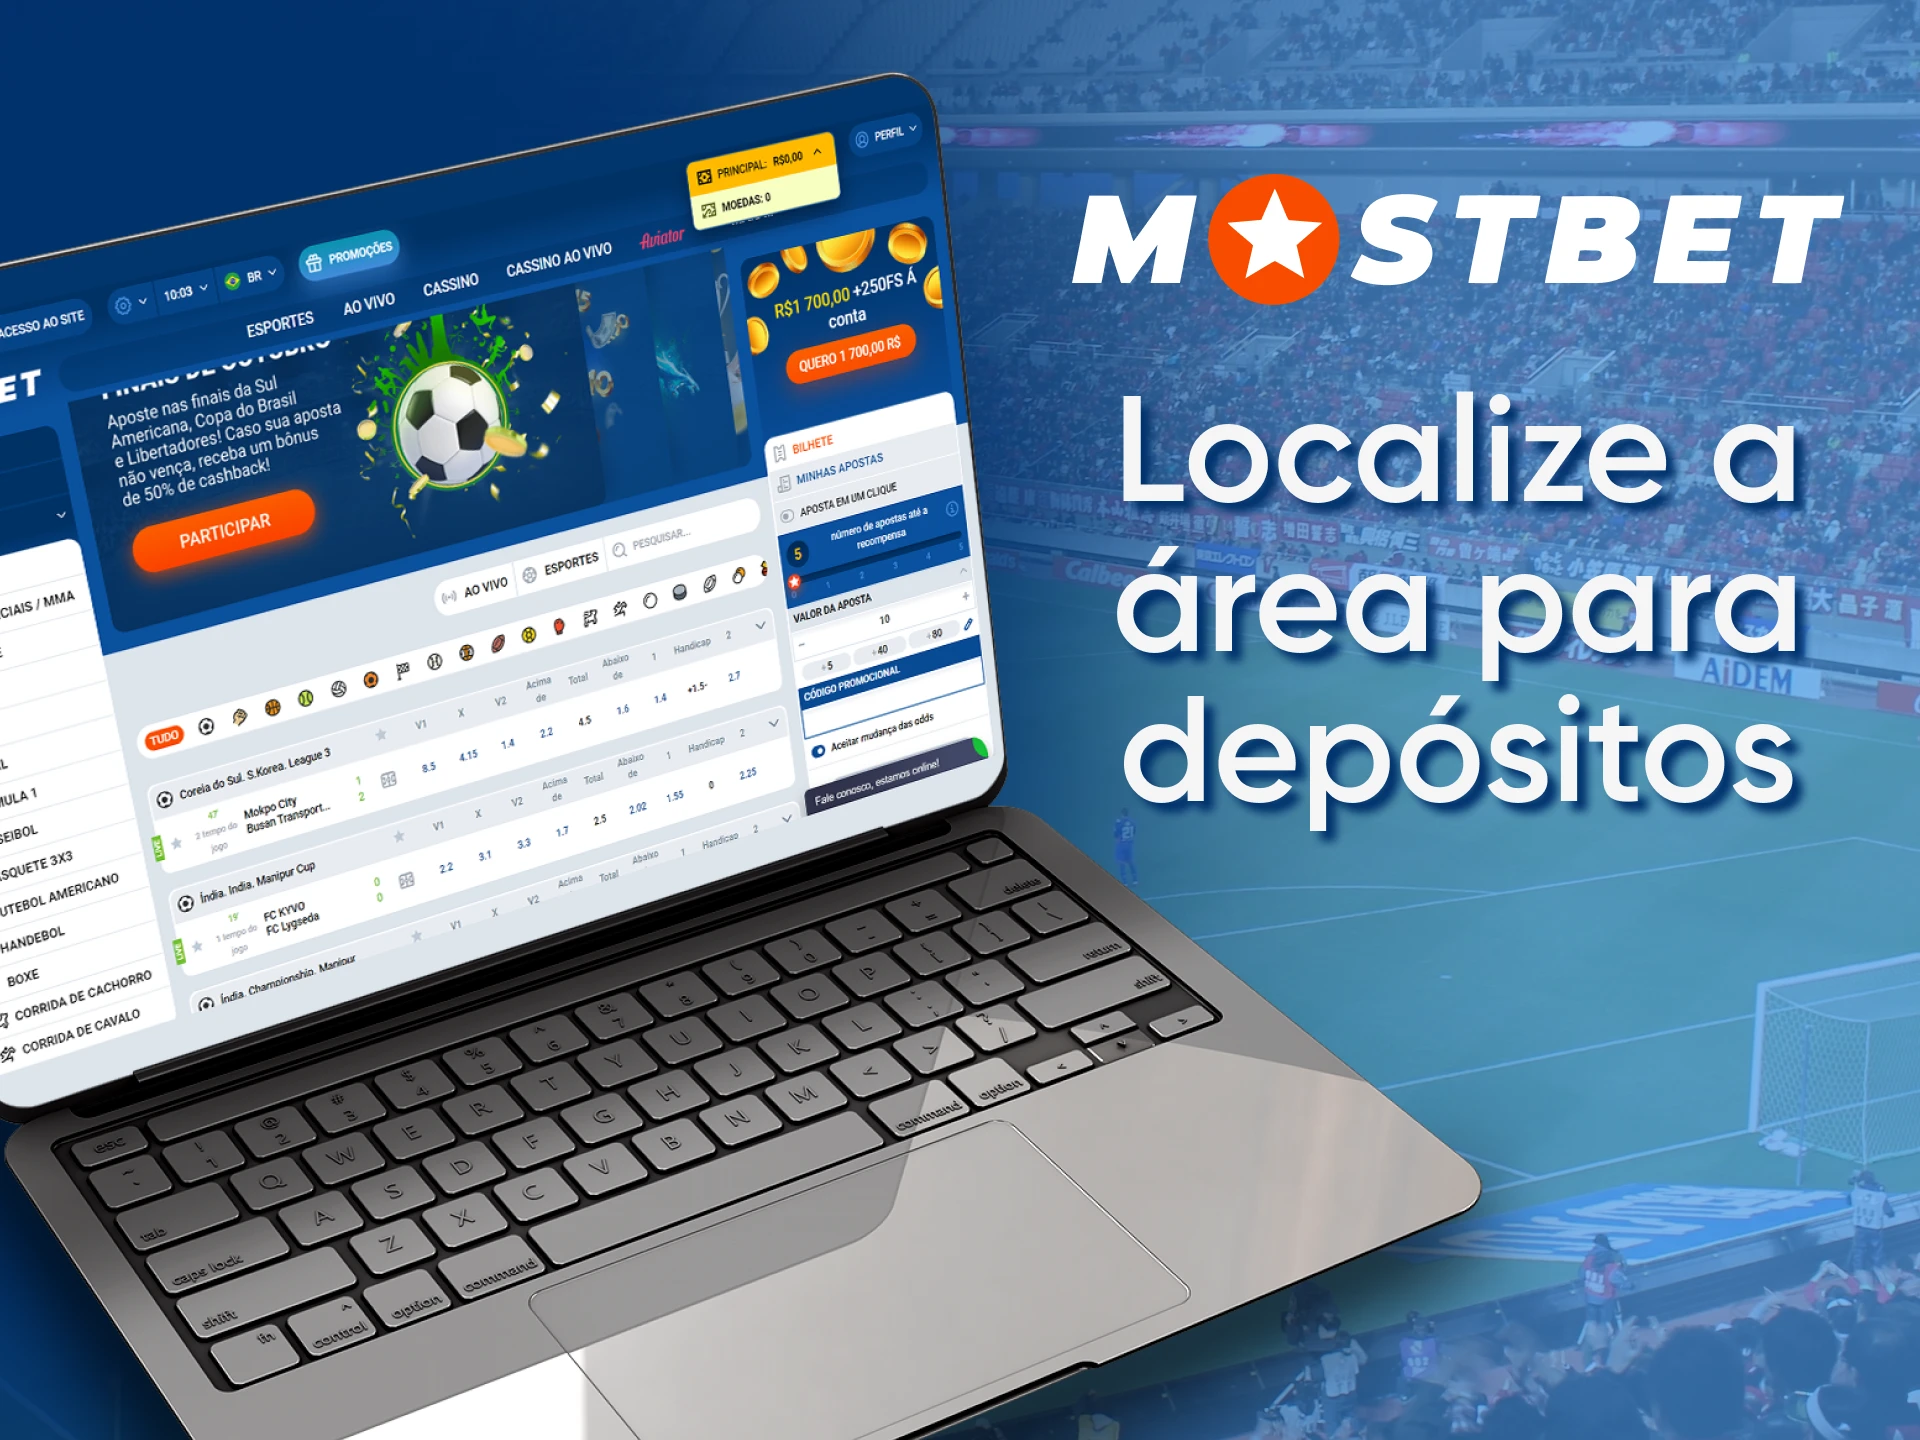 Go to Mostbet account recharge section.